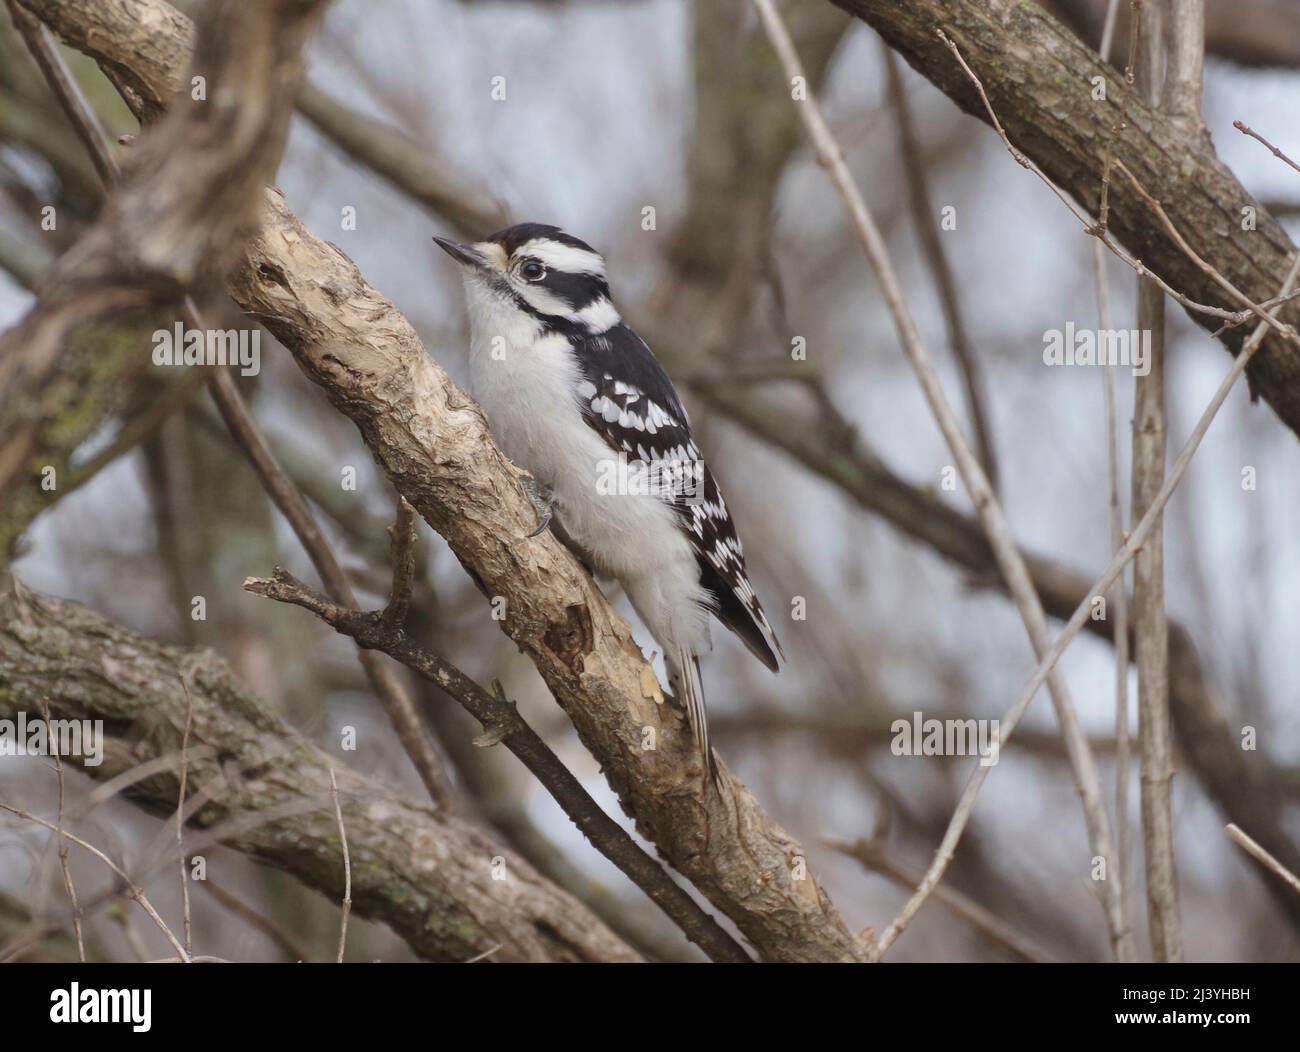 Female Downy Woodpecker, Picoides pubescens, on  tree branch, North American native bird species. Stock Photo